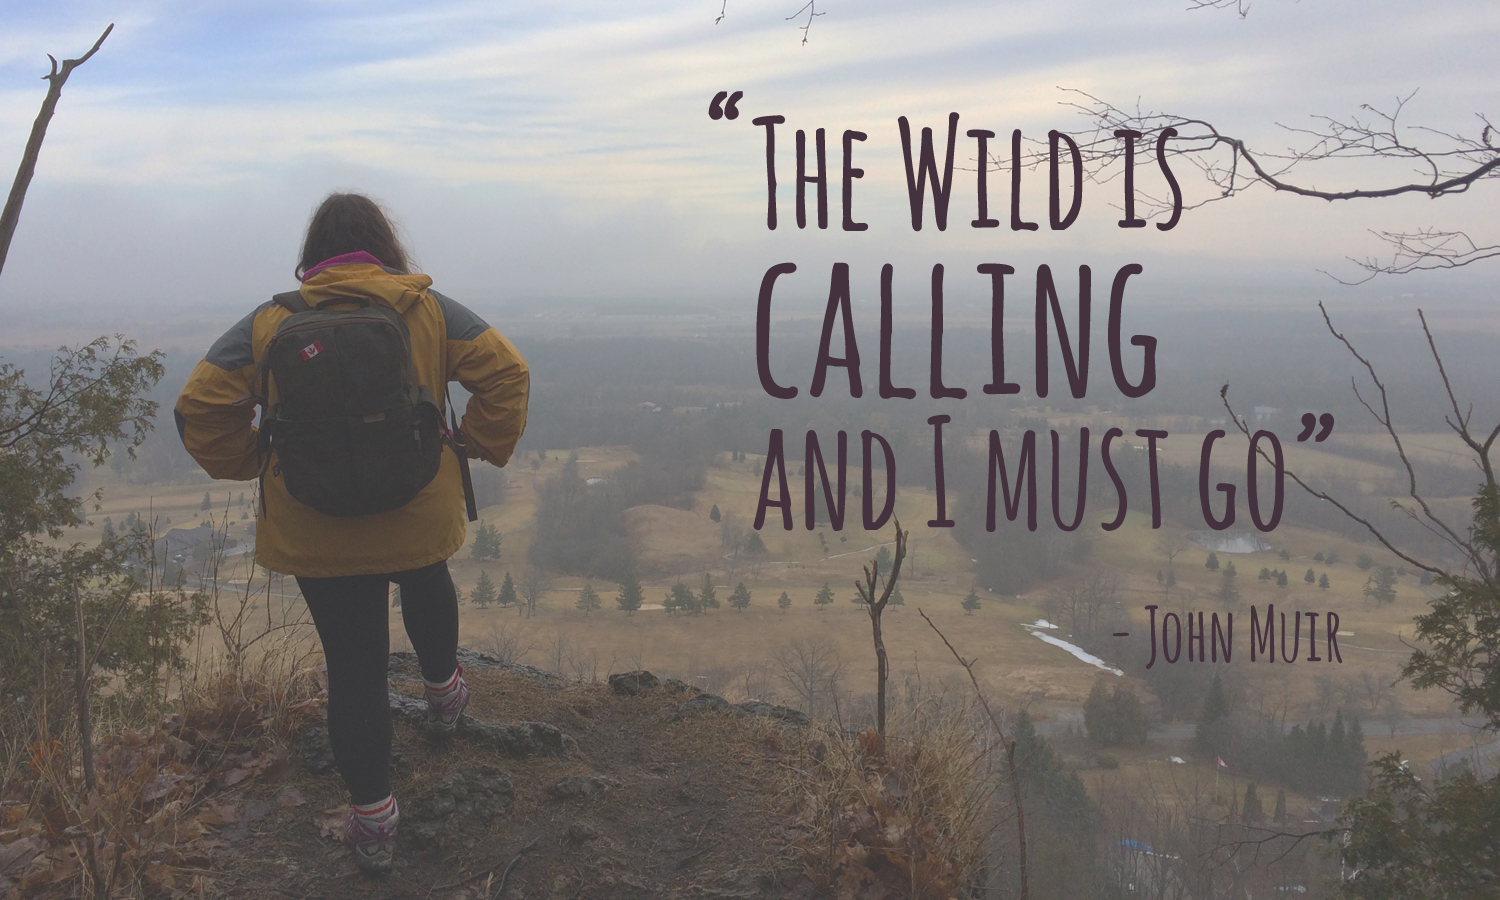 Olivia hiking with quote: The wild is calling and I must go.